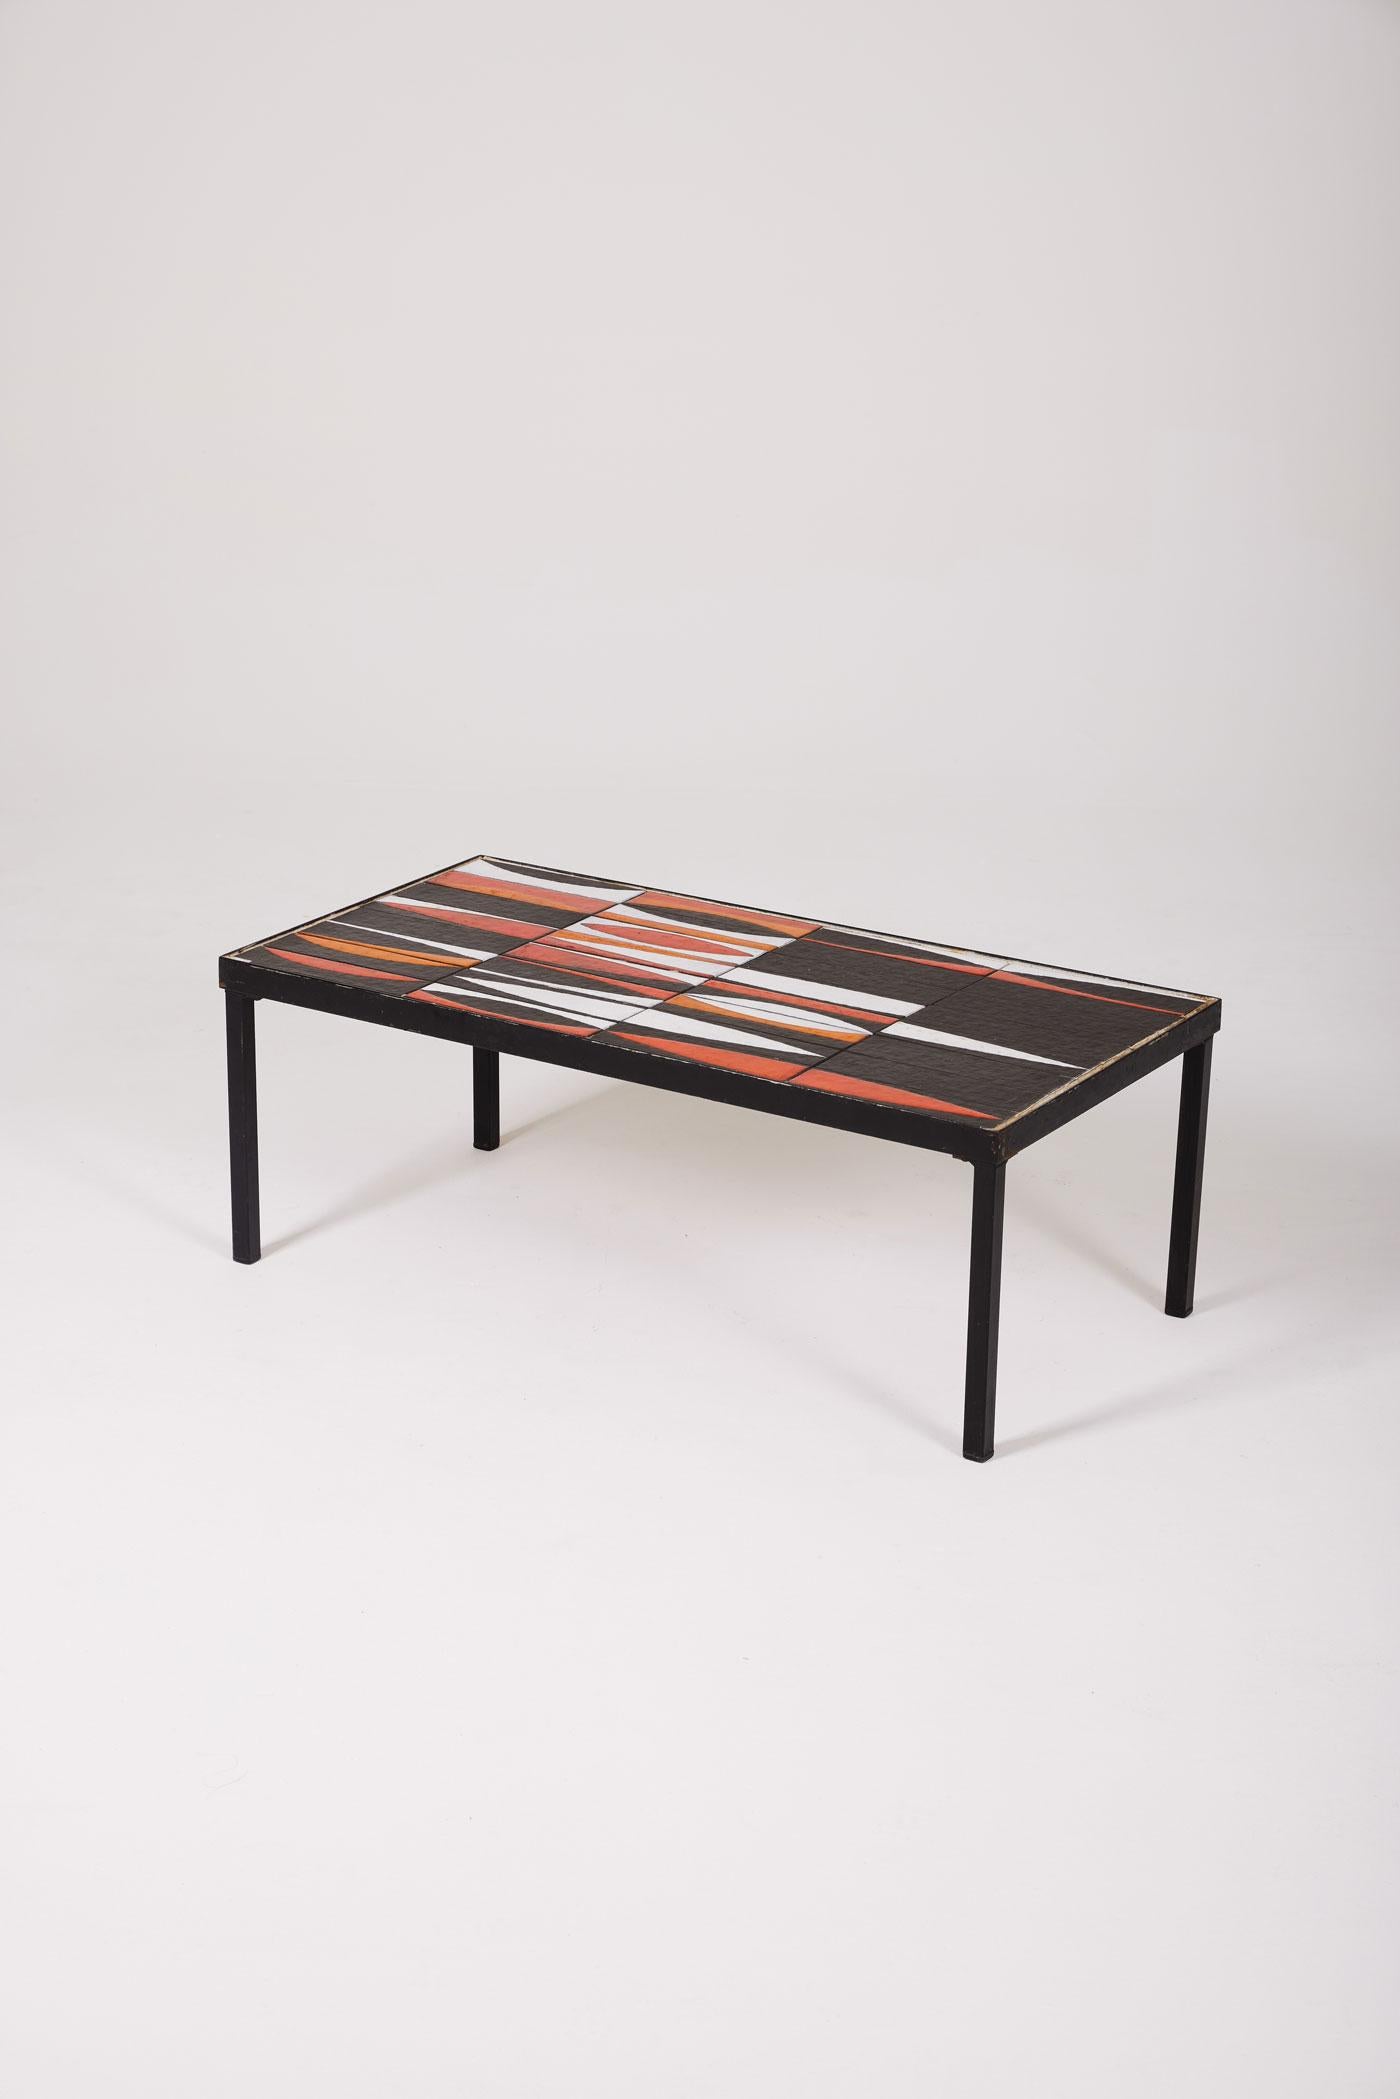 Ceramic coffee table, Navette model, by the ceramist Roger Capron, 1960s. The structure is in black lacquered metal, and the top is in red, black, and white enameled ceramic.
LP1379